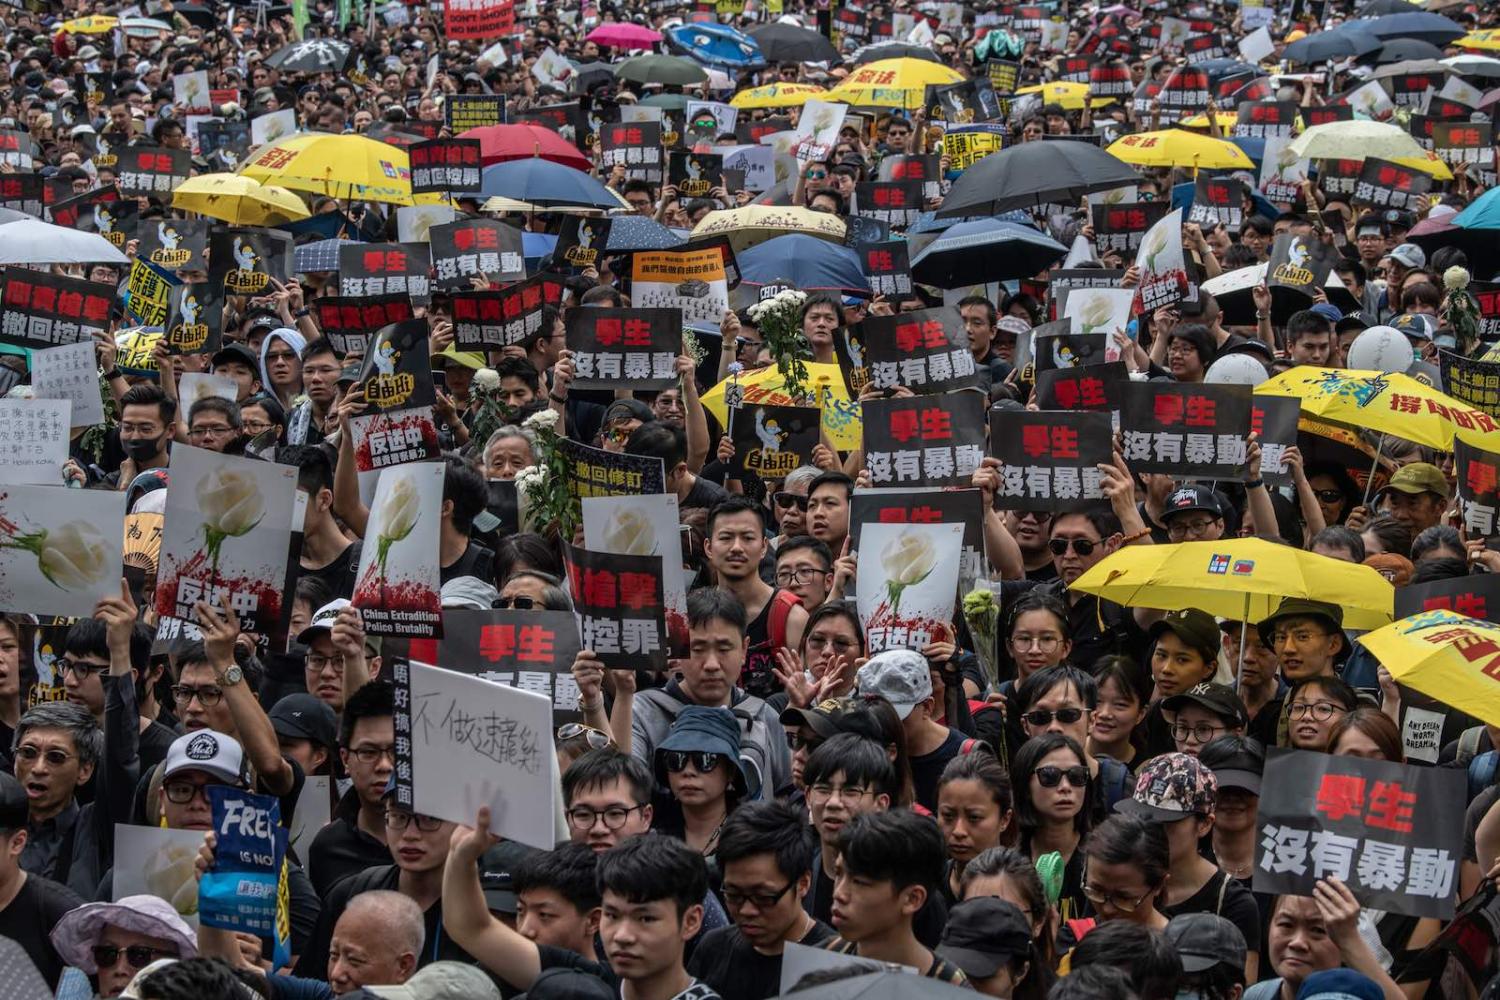 Protests continued on Sunday despite an announcement by Hong Kong’s Chief Executive Carrie Lam the controversial extradition bill will be suspended indefinitely (Photo: Carl Court/Getty)